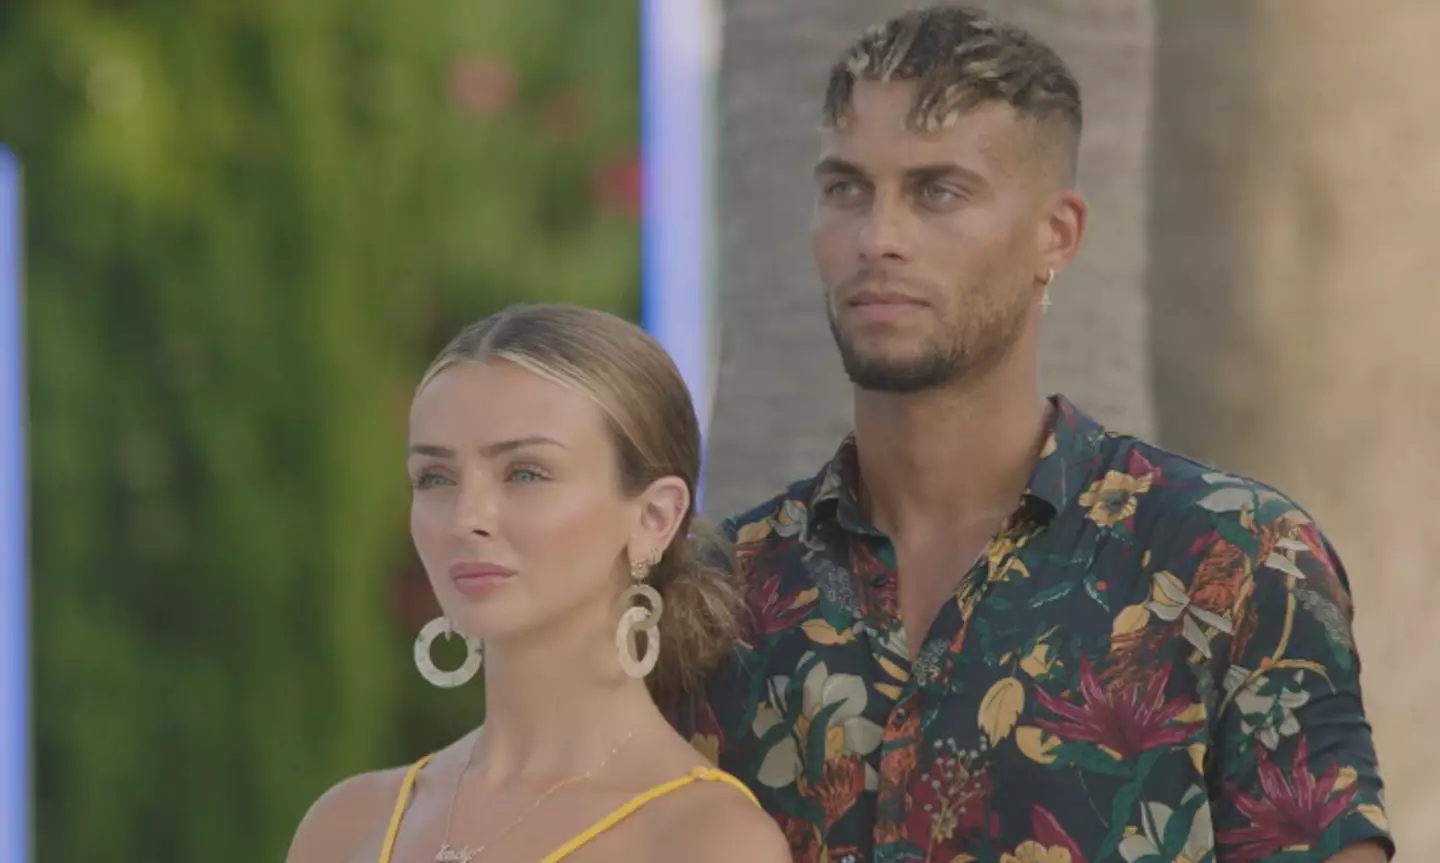 Fans think Kady McDermott and Ouzy See have split up.